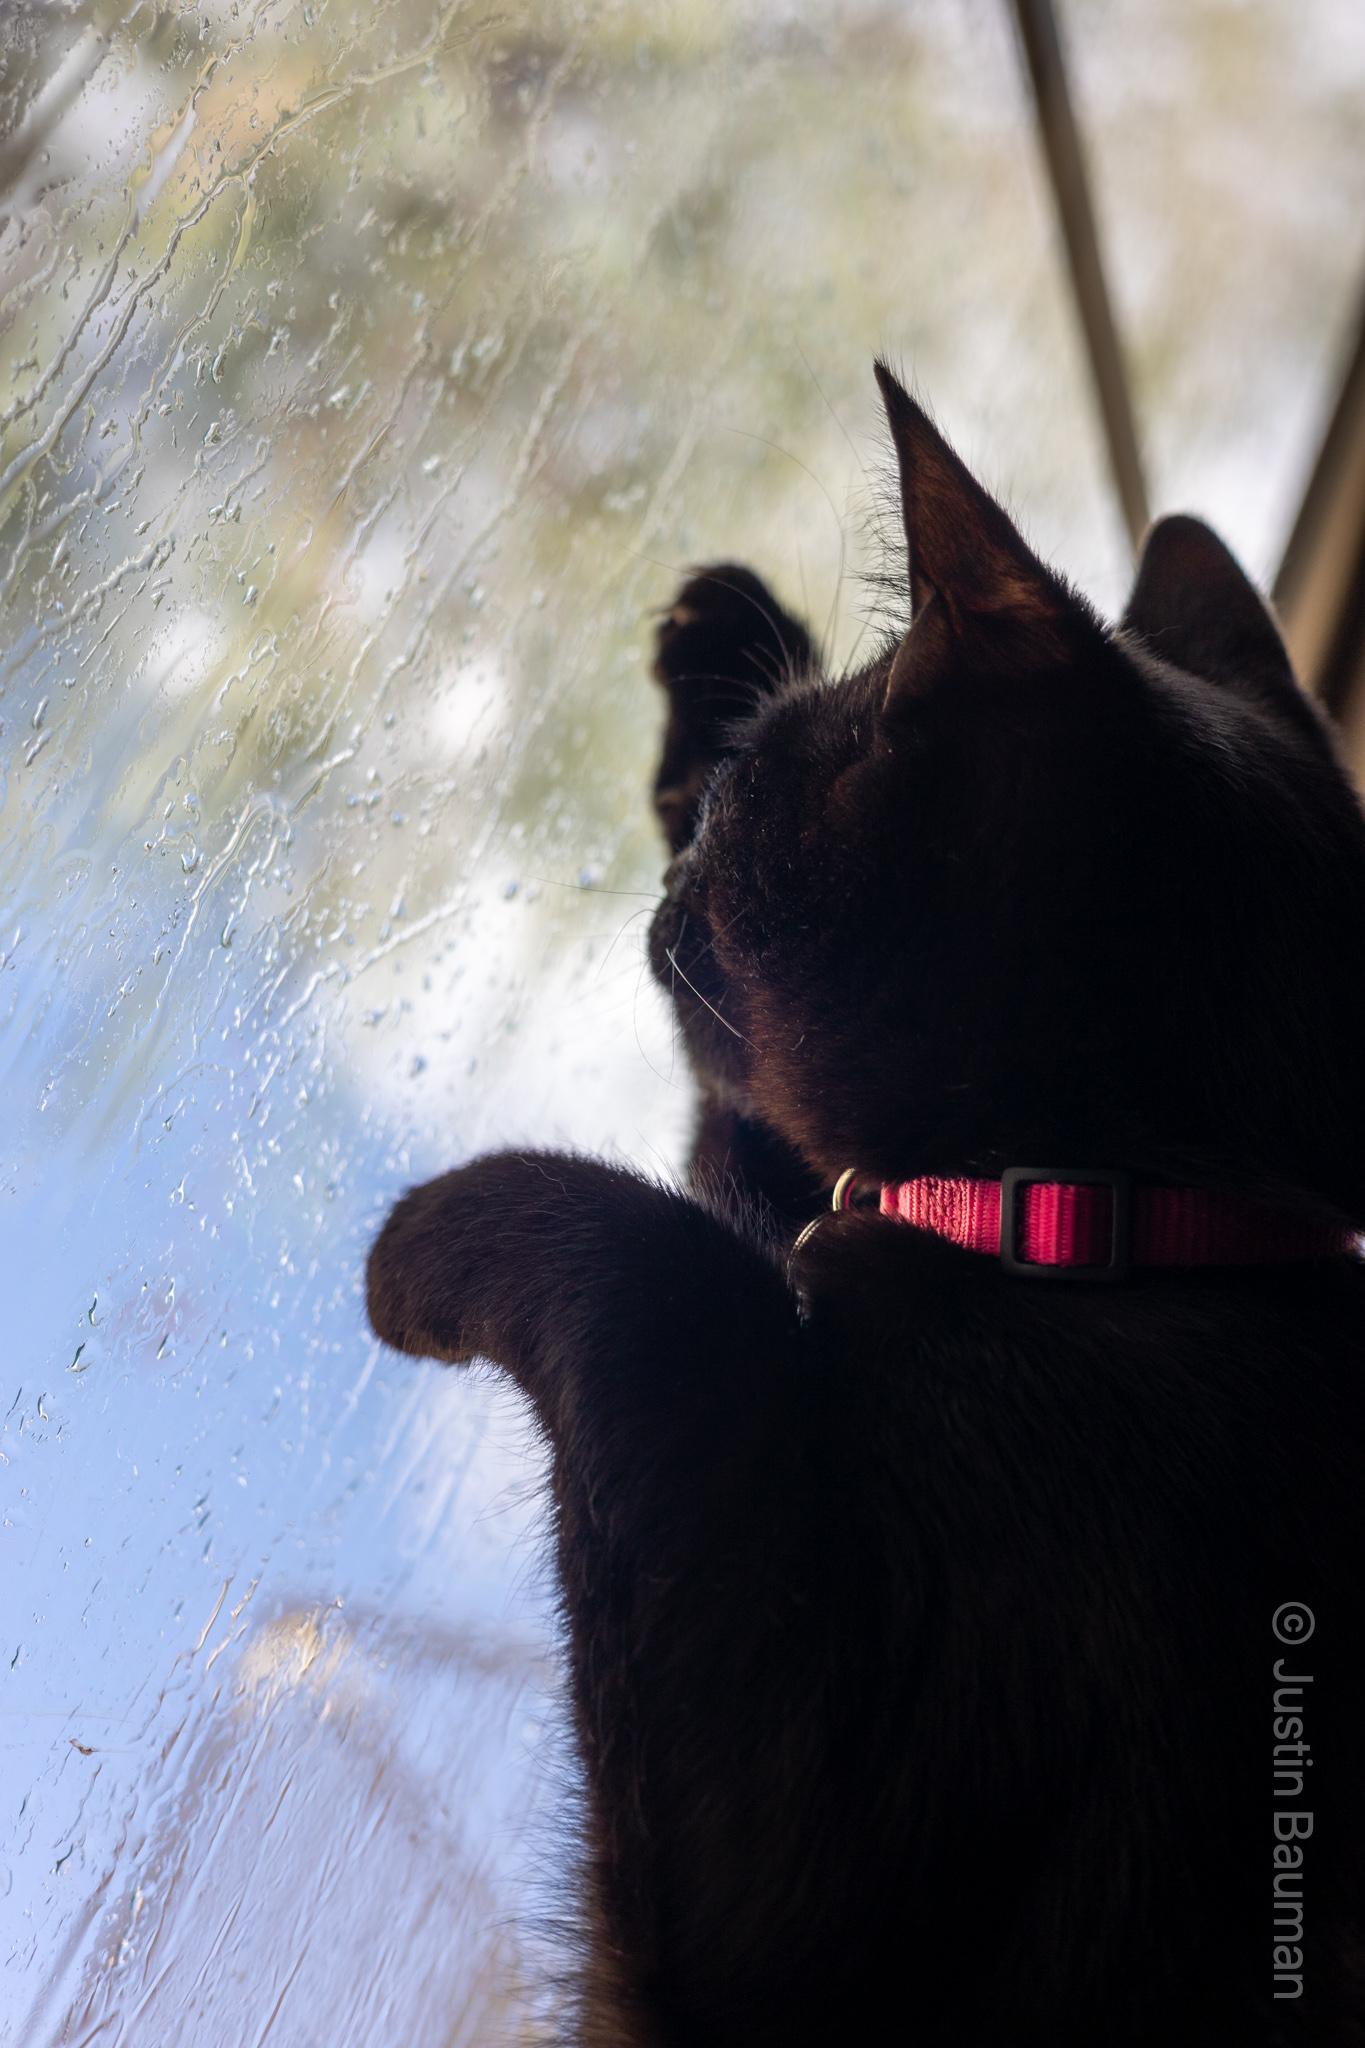 Luna looking through window at rain for first time.